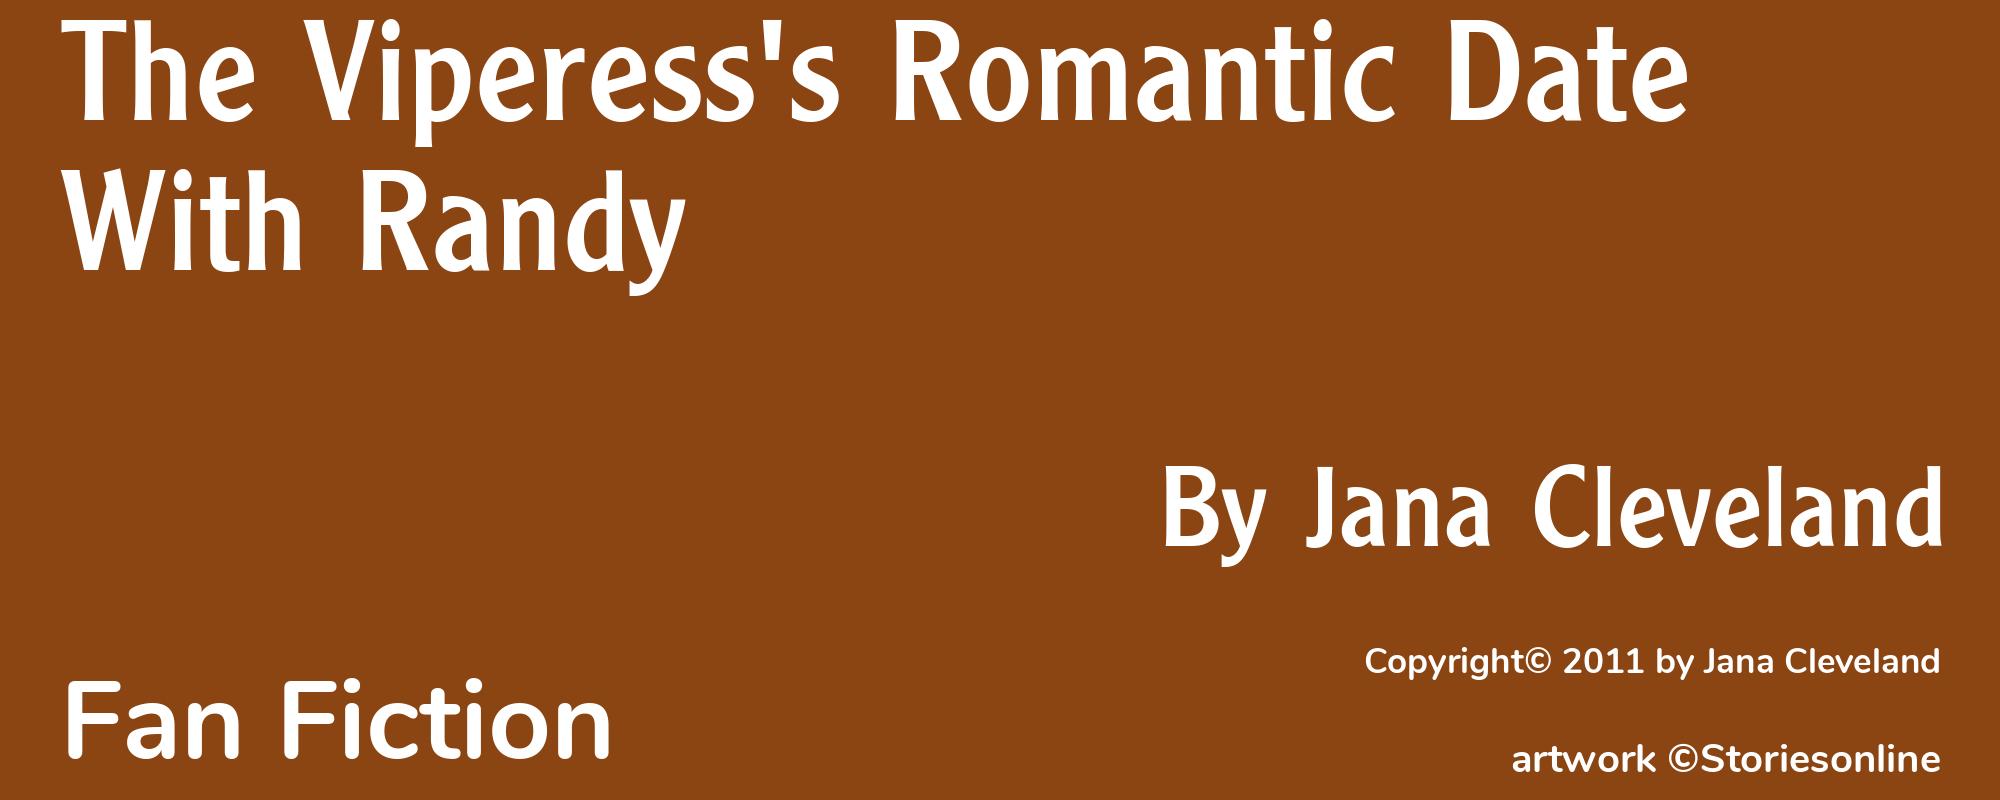 The Viperess's Romantic Date With Randy - Cover